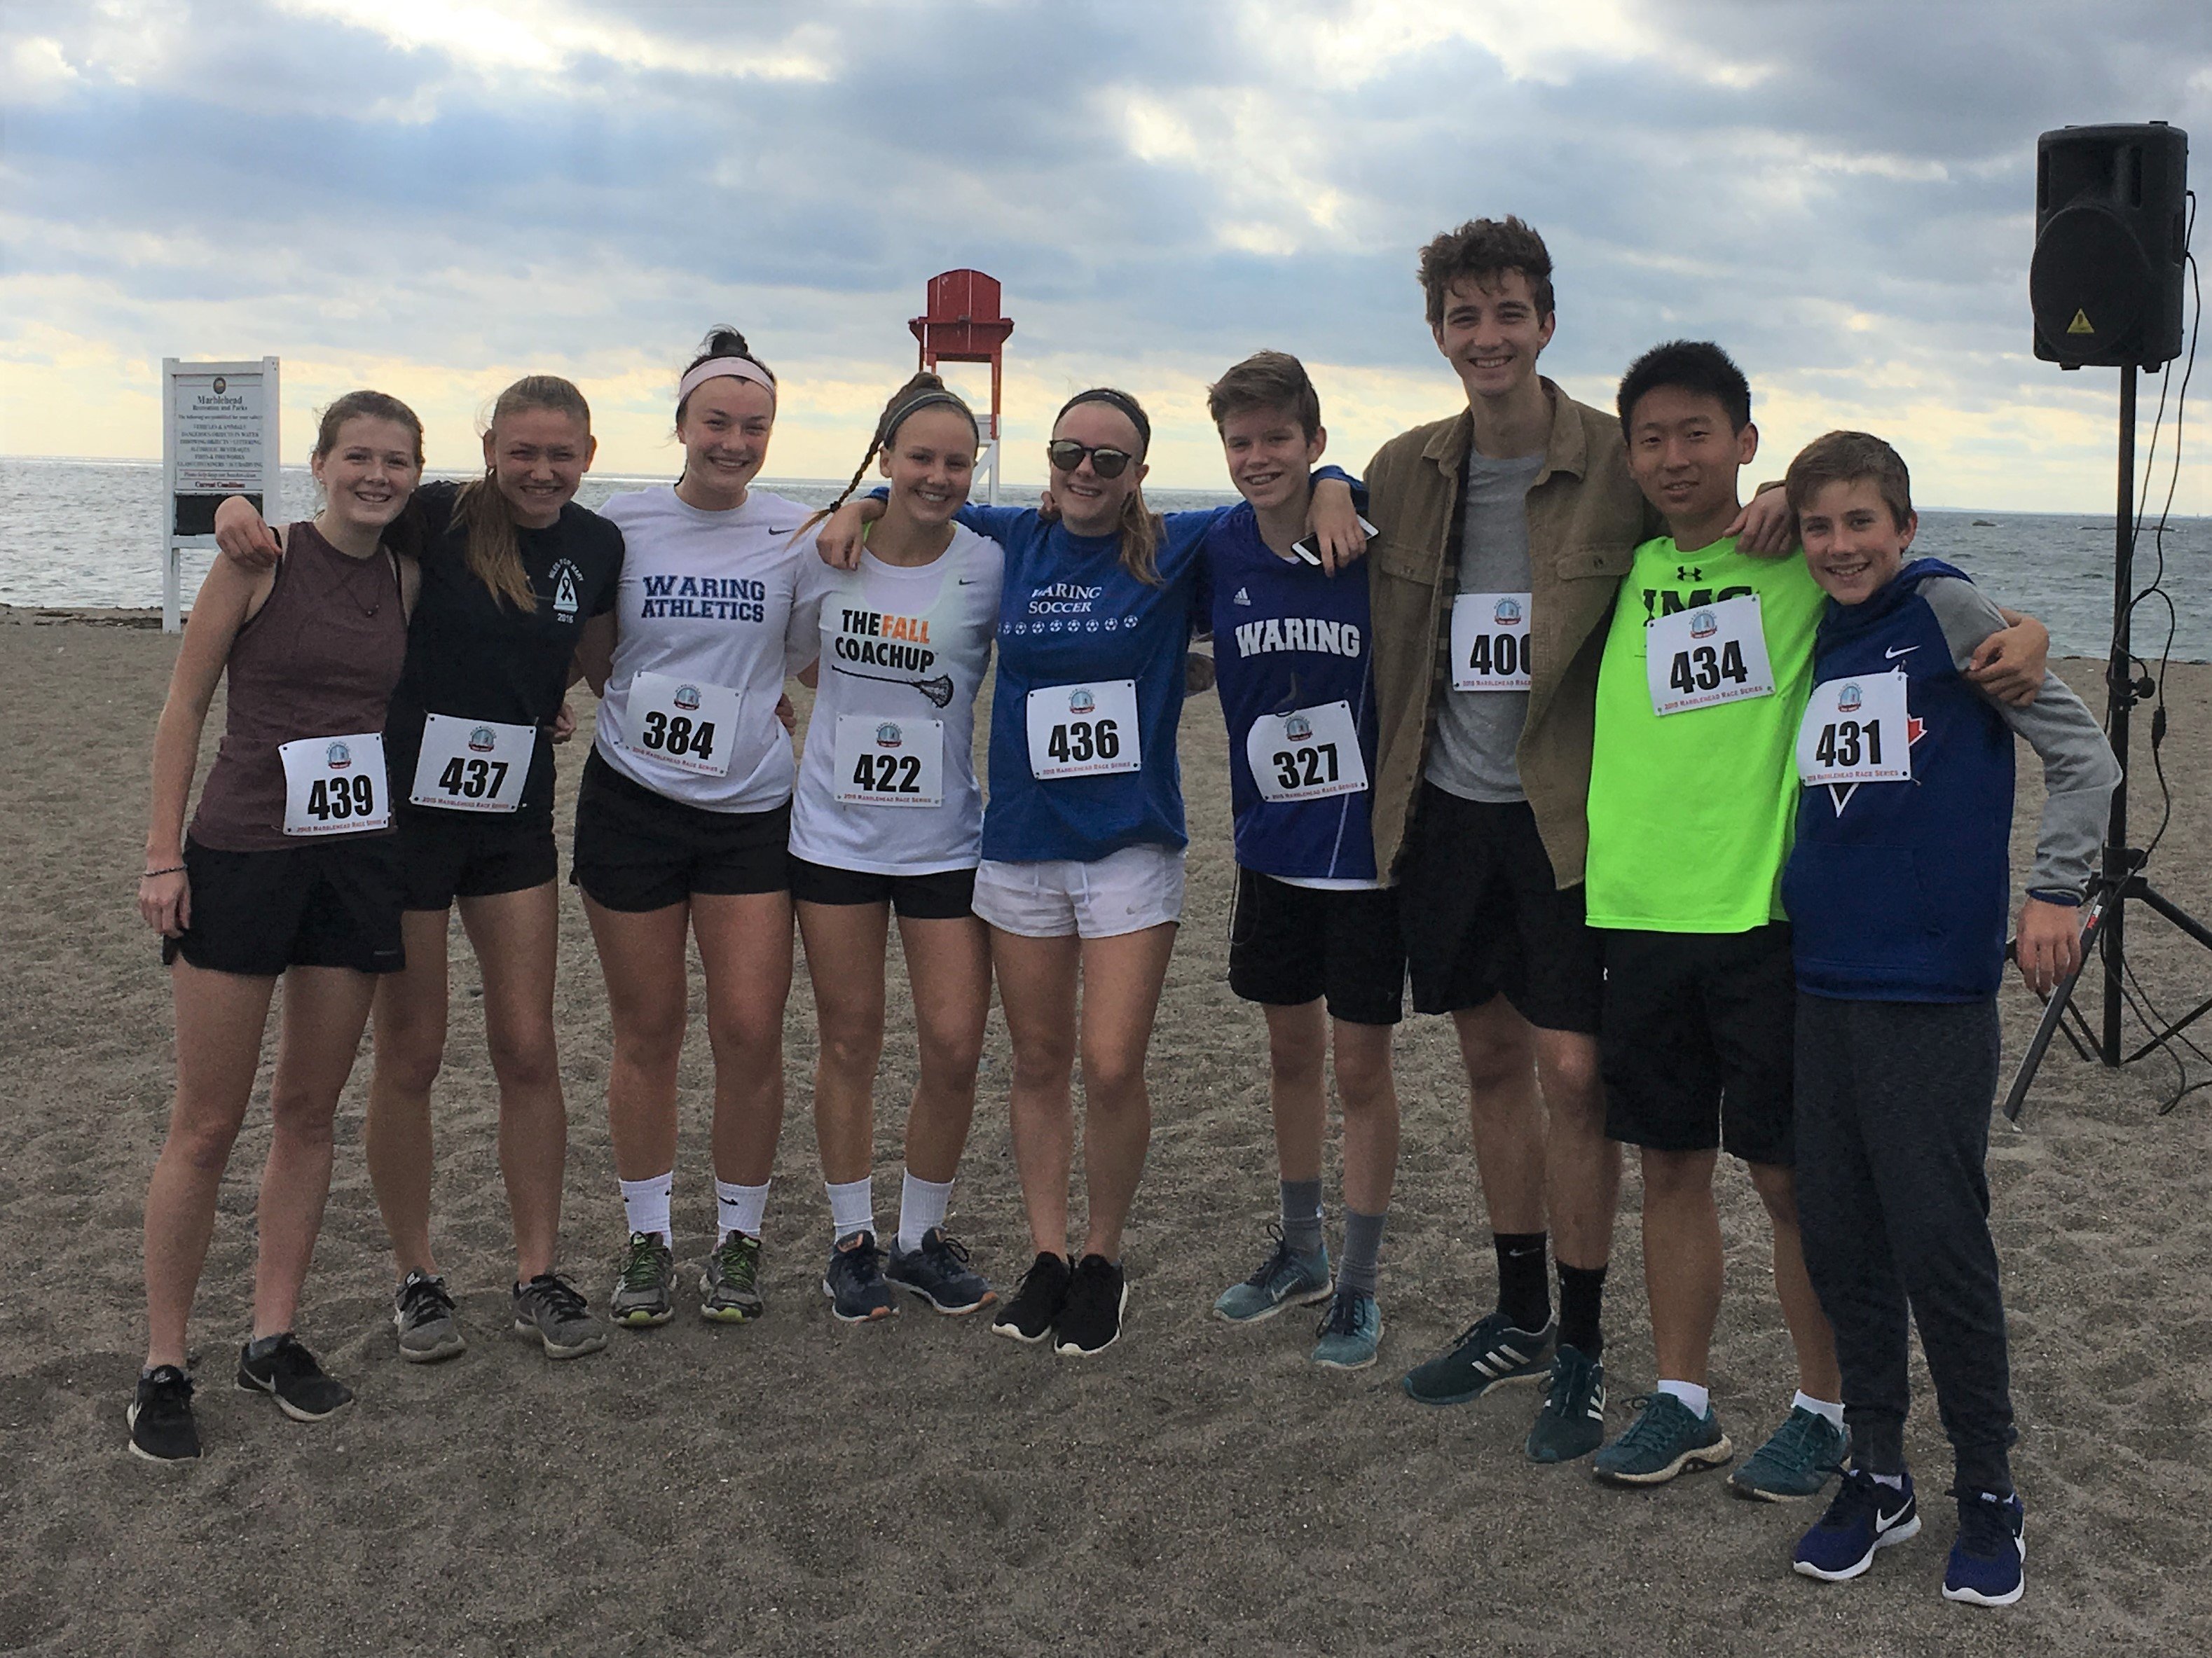 Waring Team Miles for Mary 5k 2018